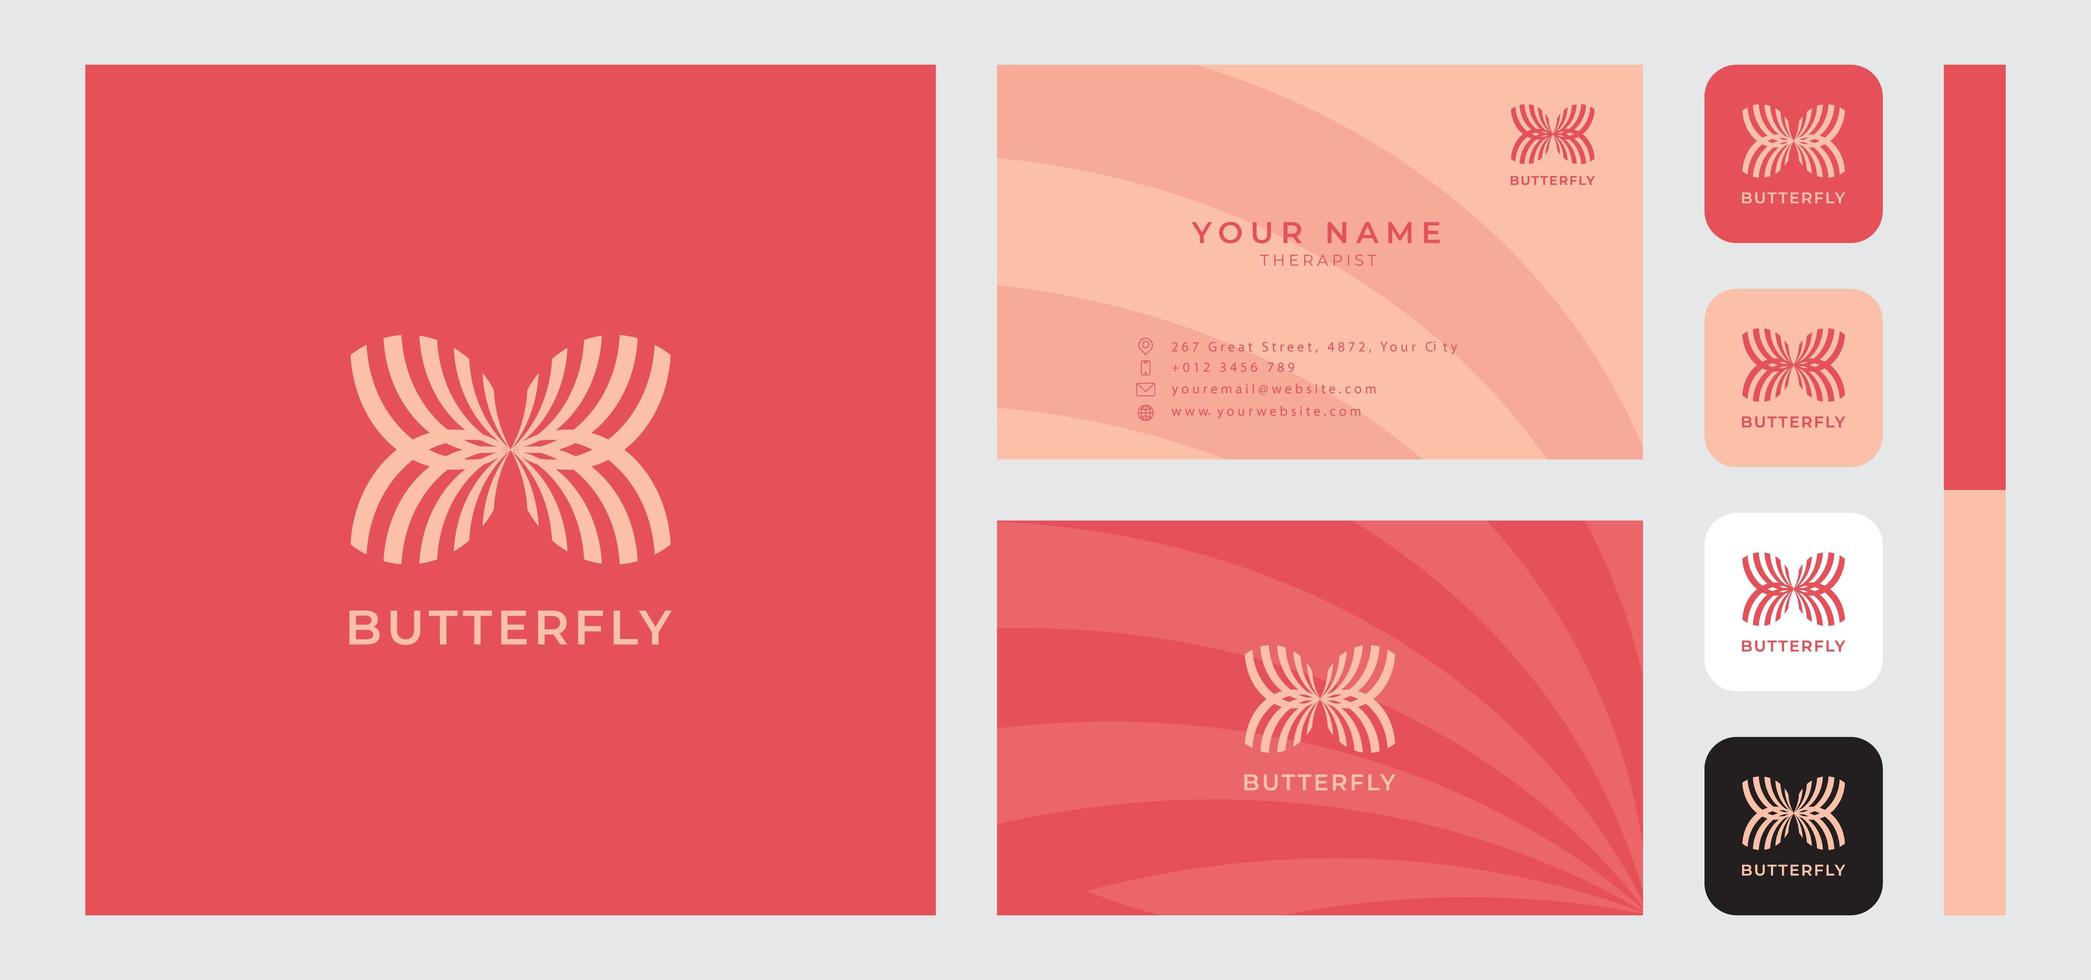 Minimalist Butterfly Business Card Template vector